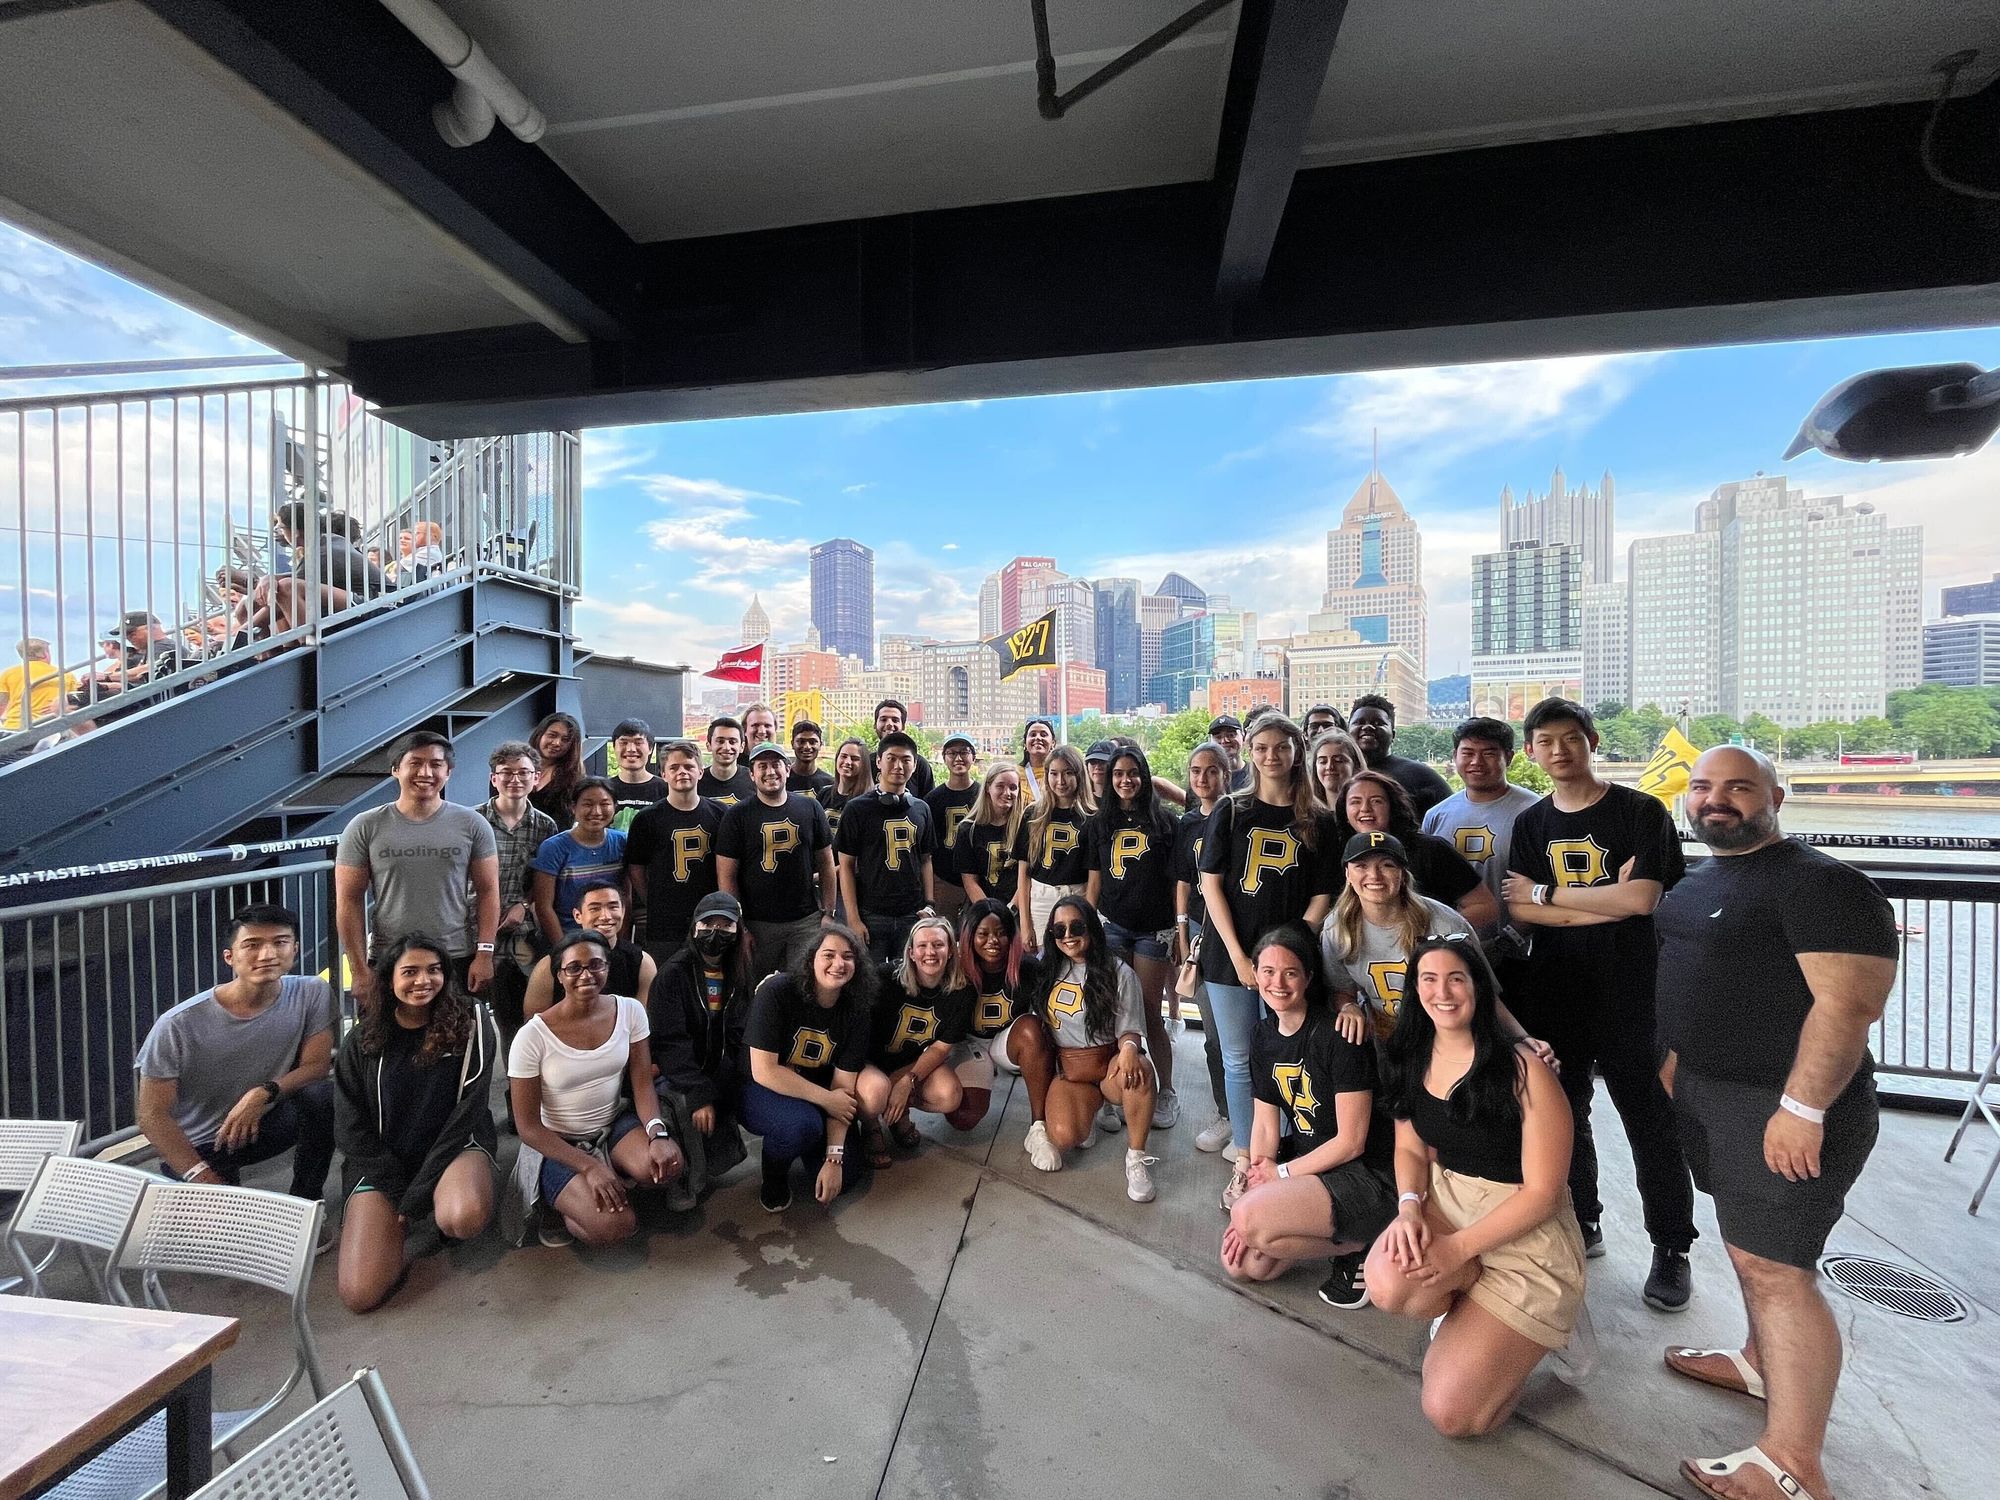 A large group of Duolingo interns in matching t-shirts at a baseball stadium for a Pittsburgh Pirates game